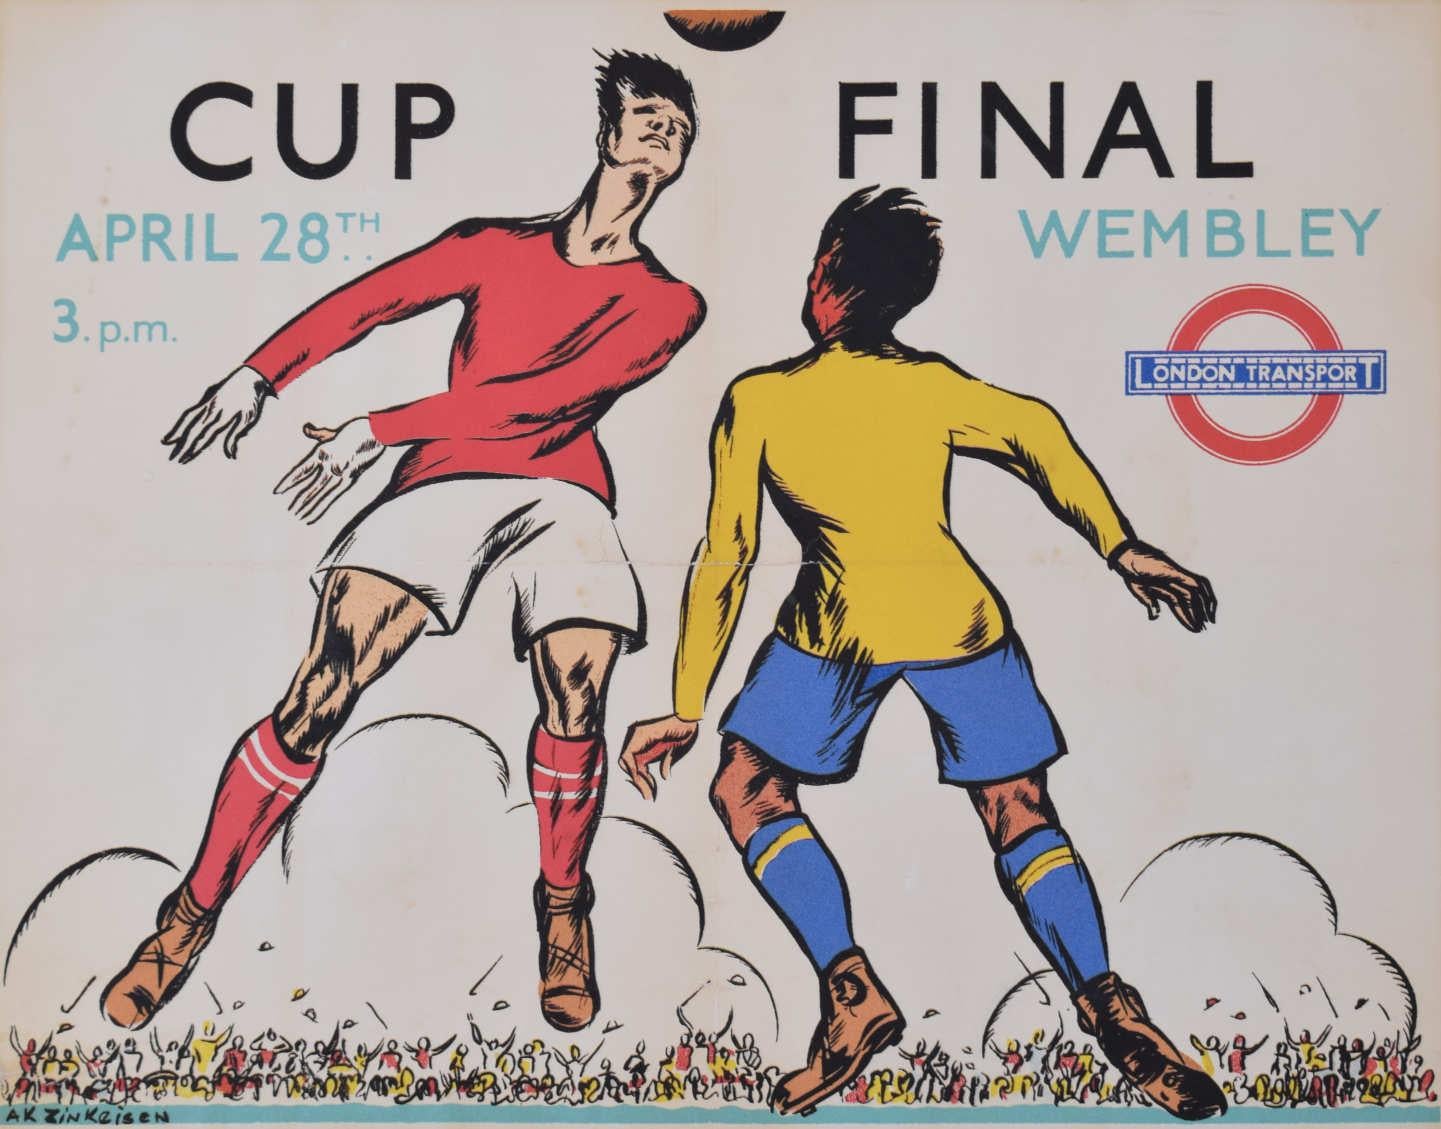 To see our other London Transport posters, scroll down to "More from this Seller" and below it click on "See all from this Seller" - or send us a message if you cannot find the poster you want.

Anna Zinkeisen (1901 - 1976)
Wembley Cup Final